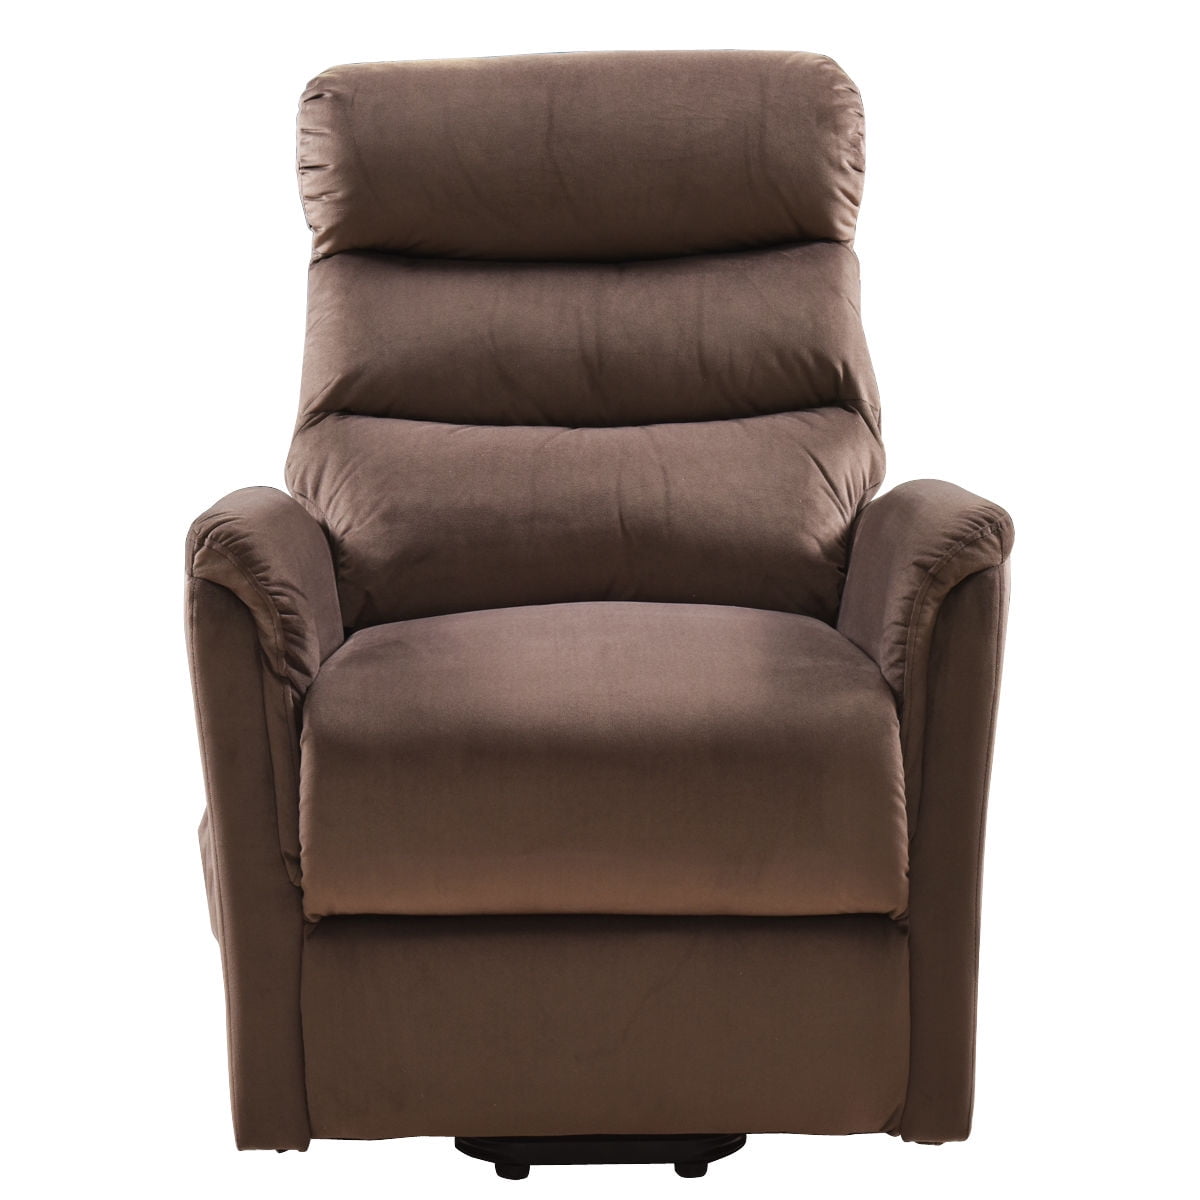 lift-chairs-recliners-covered-by-medicare-electric-lift-chairs